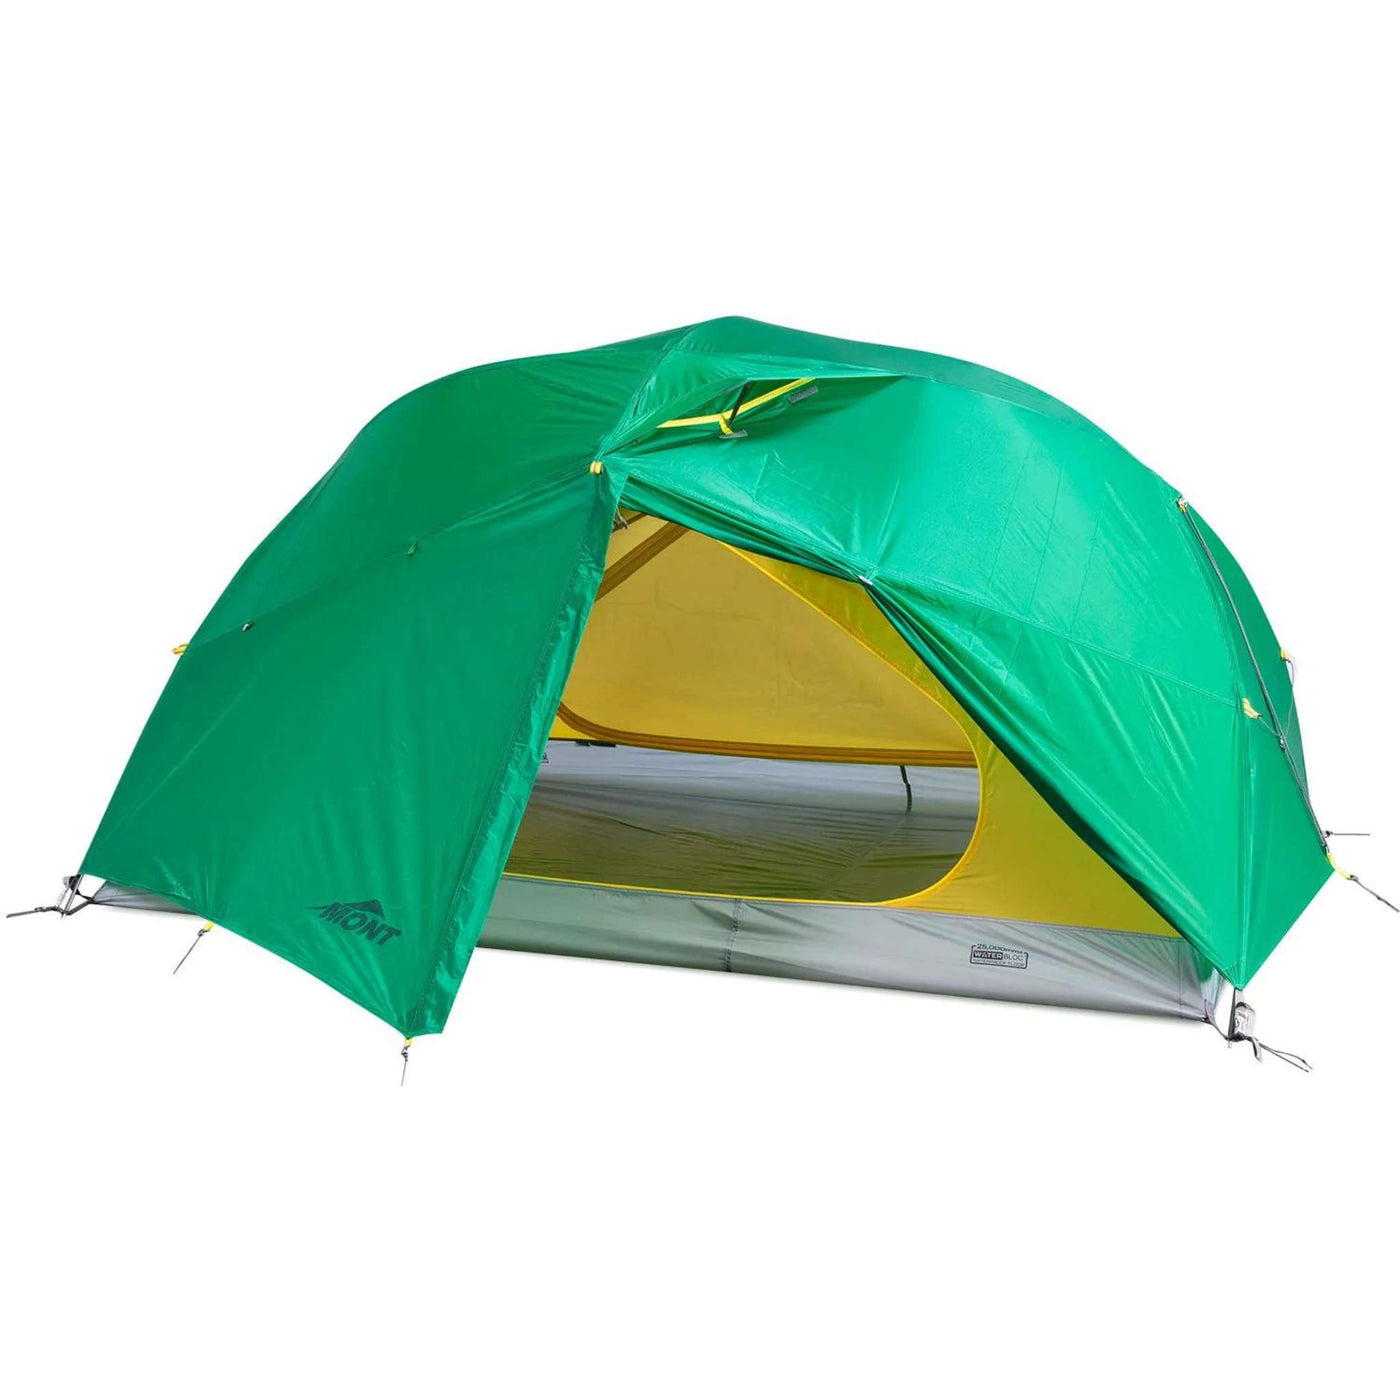 Mont Dragonfly Tent | 2 Person 4 Season Tent NZ | Further Faster Christchurch NZ 